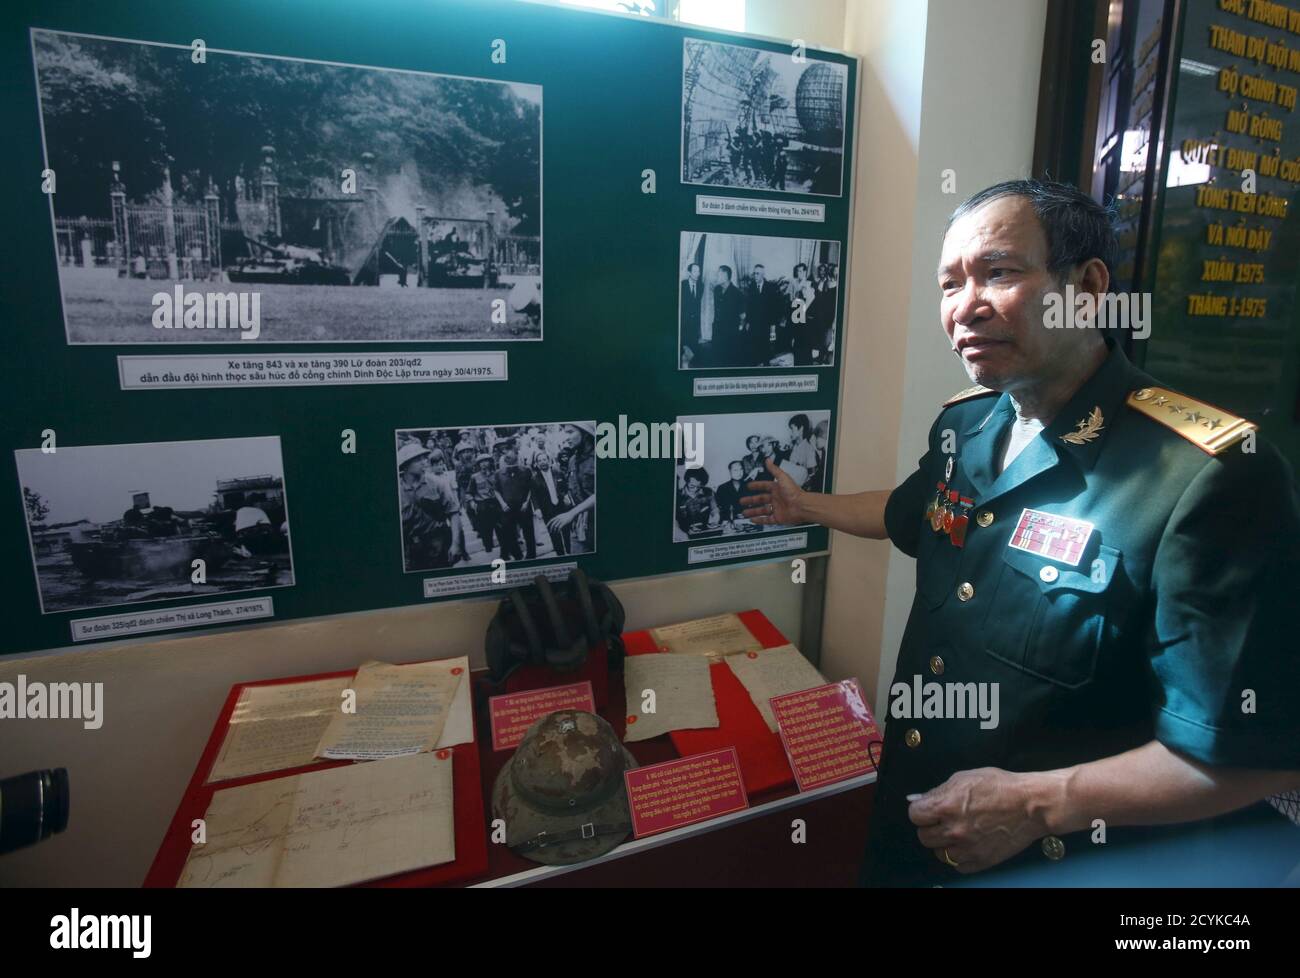 Veteran Phung Ba Dam points to a photo showing him and his team with former  South Vietnamese President Duong Van Minh and Prime Minister Vu Van Mau, as  they made a radio